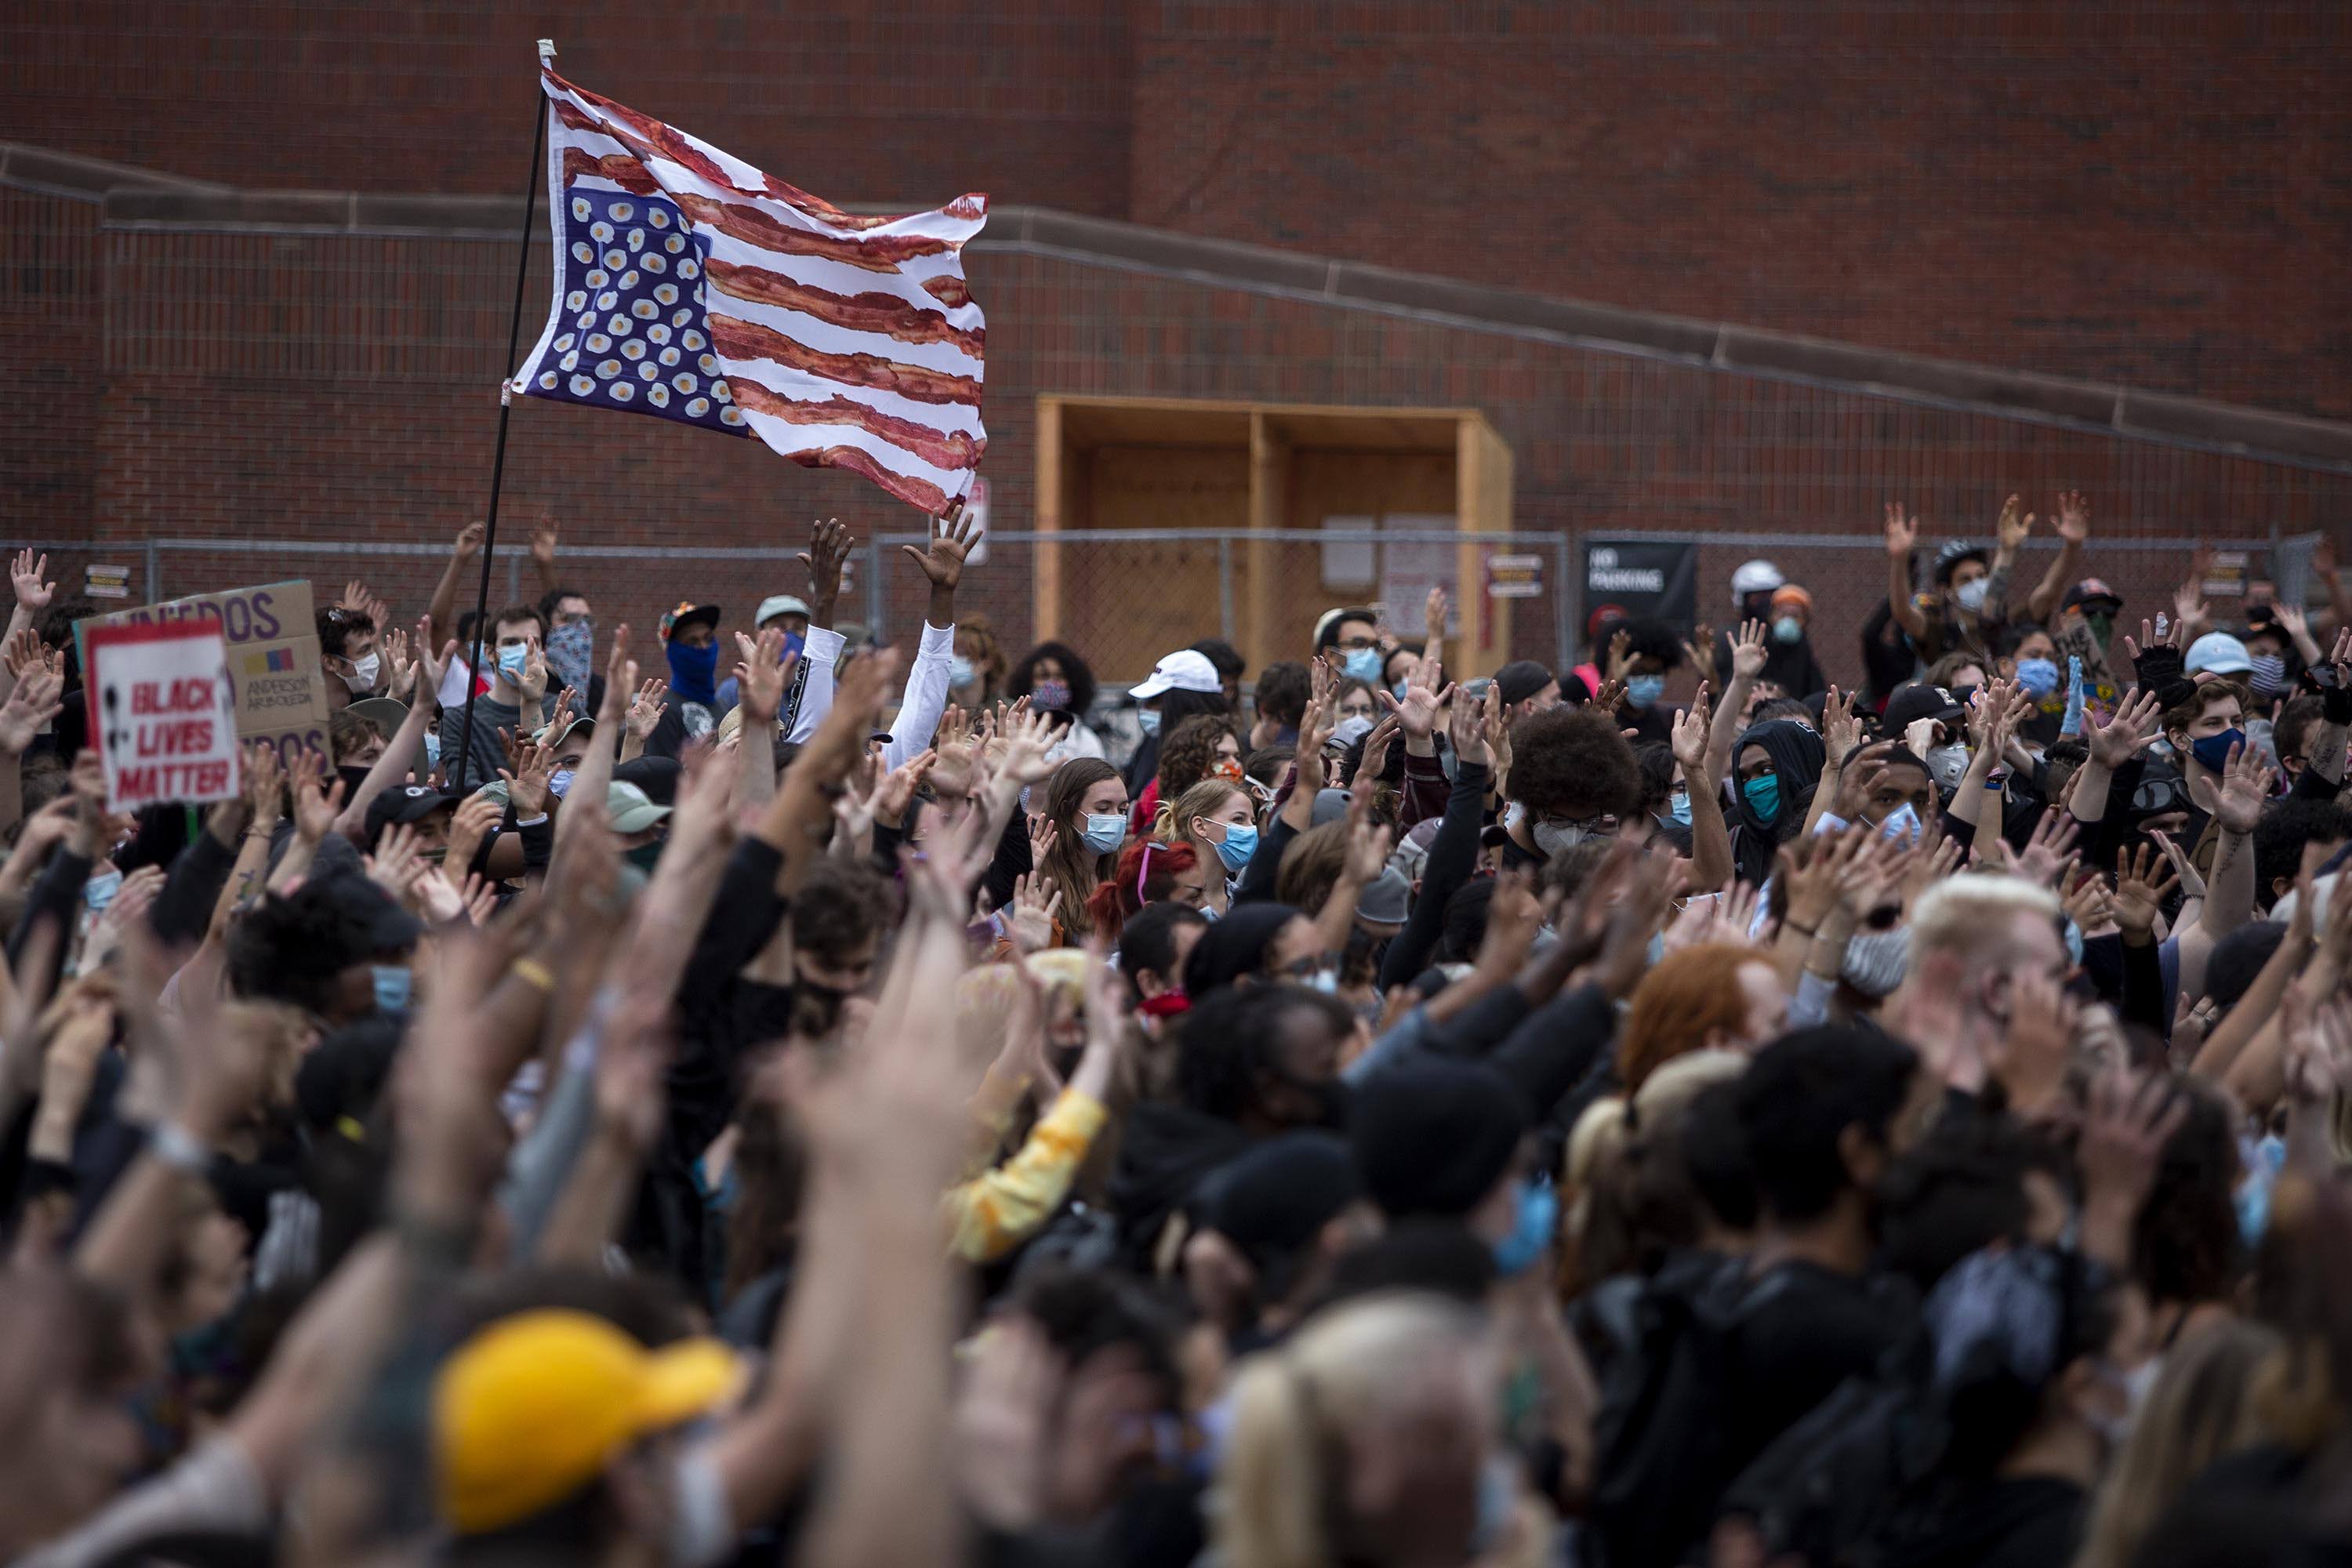 Protesters at the For The People march raise their hands in unison in City Hall Plaza. (Robin Lubbock/WBUR)